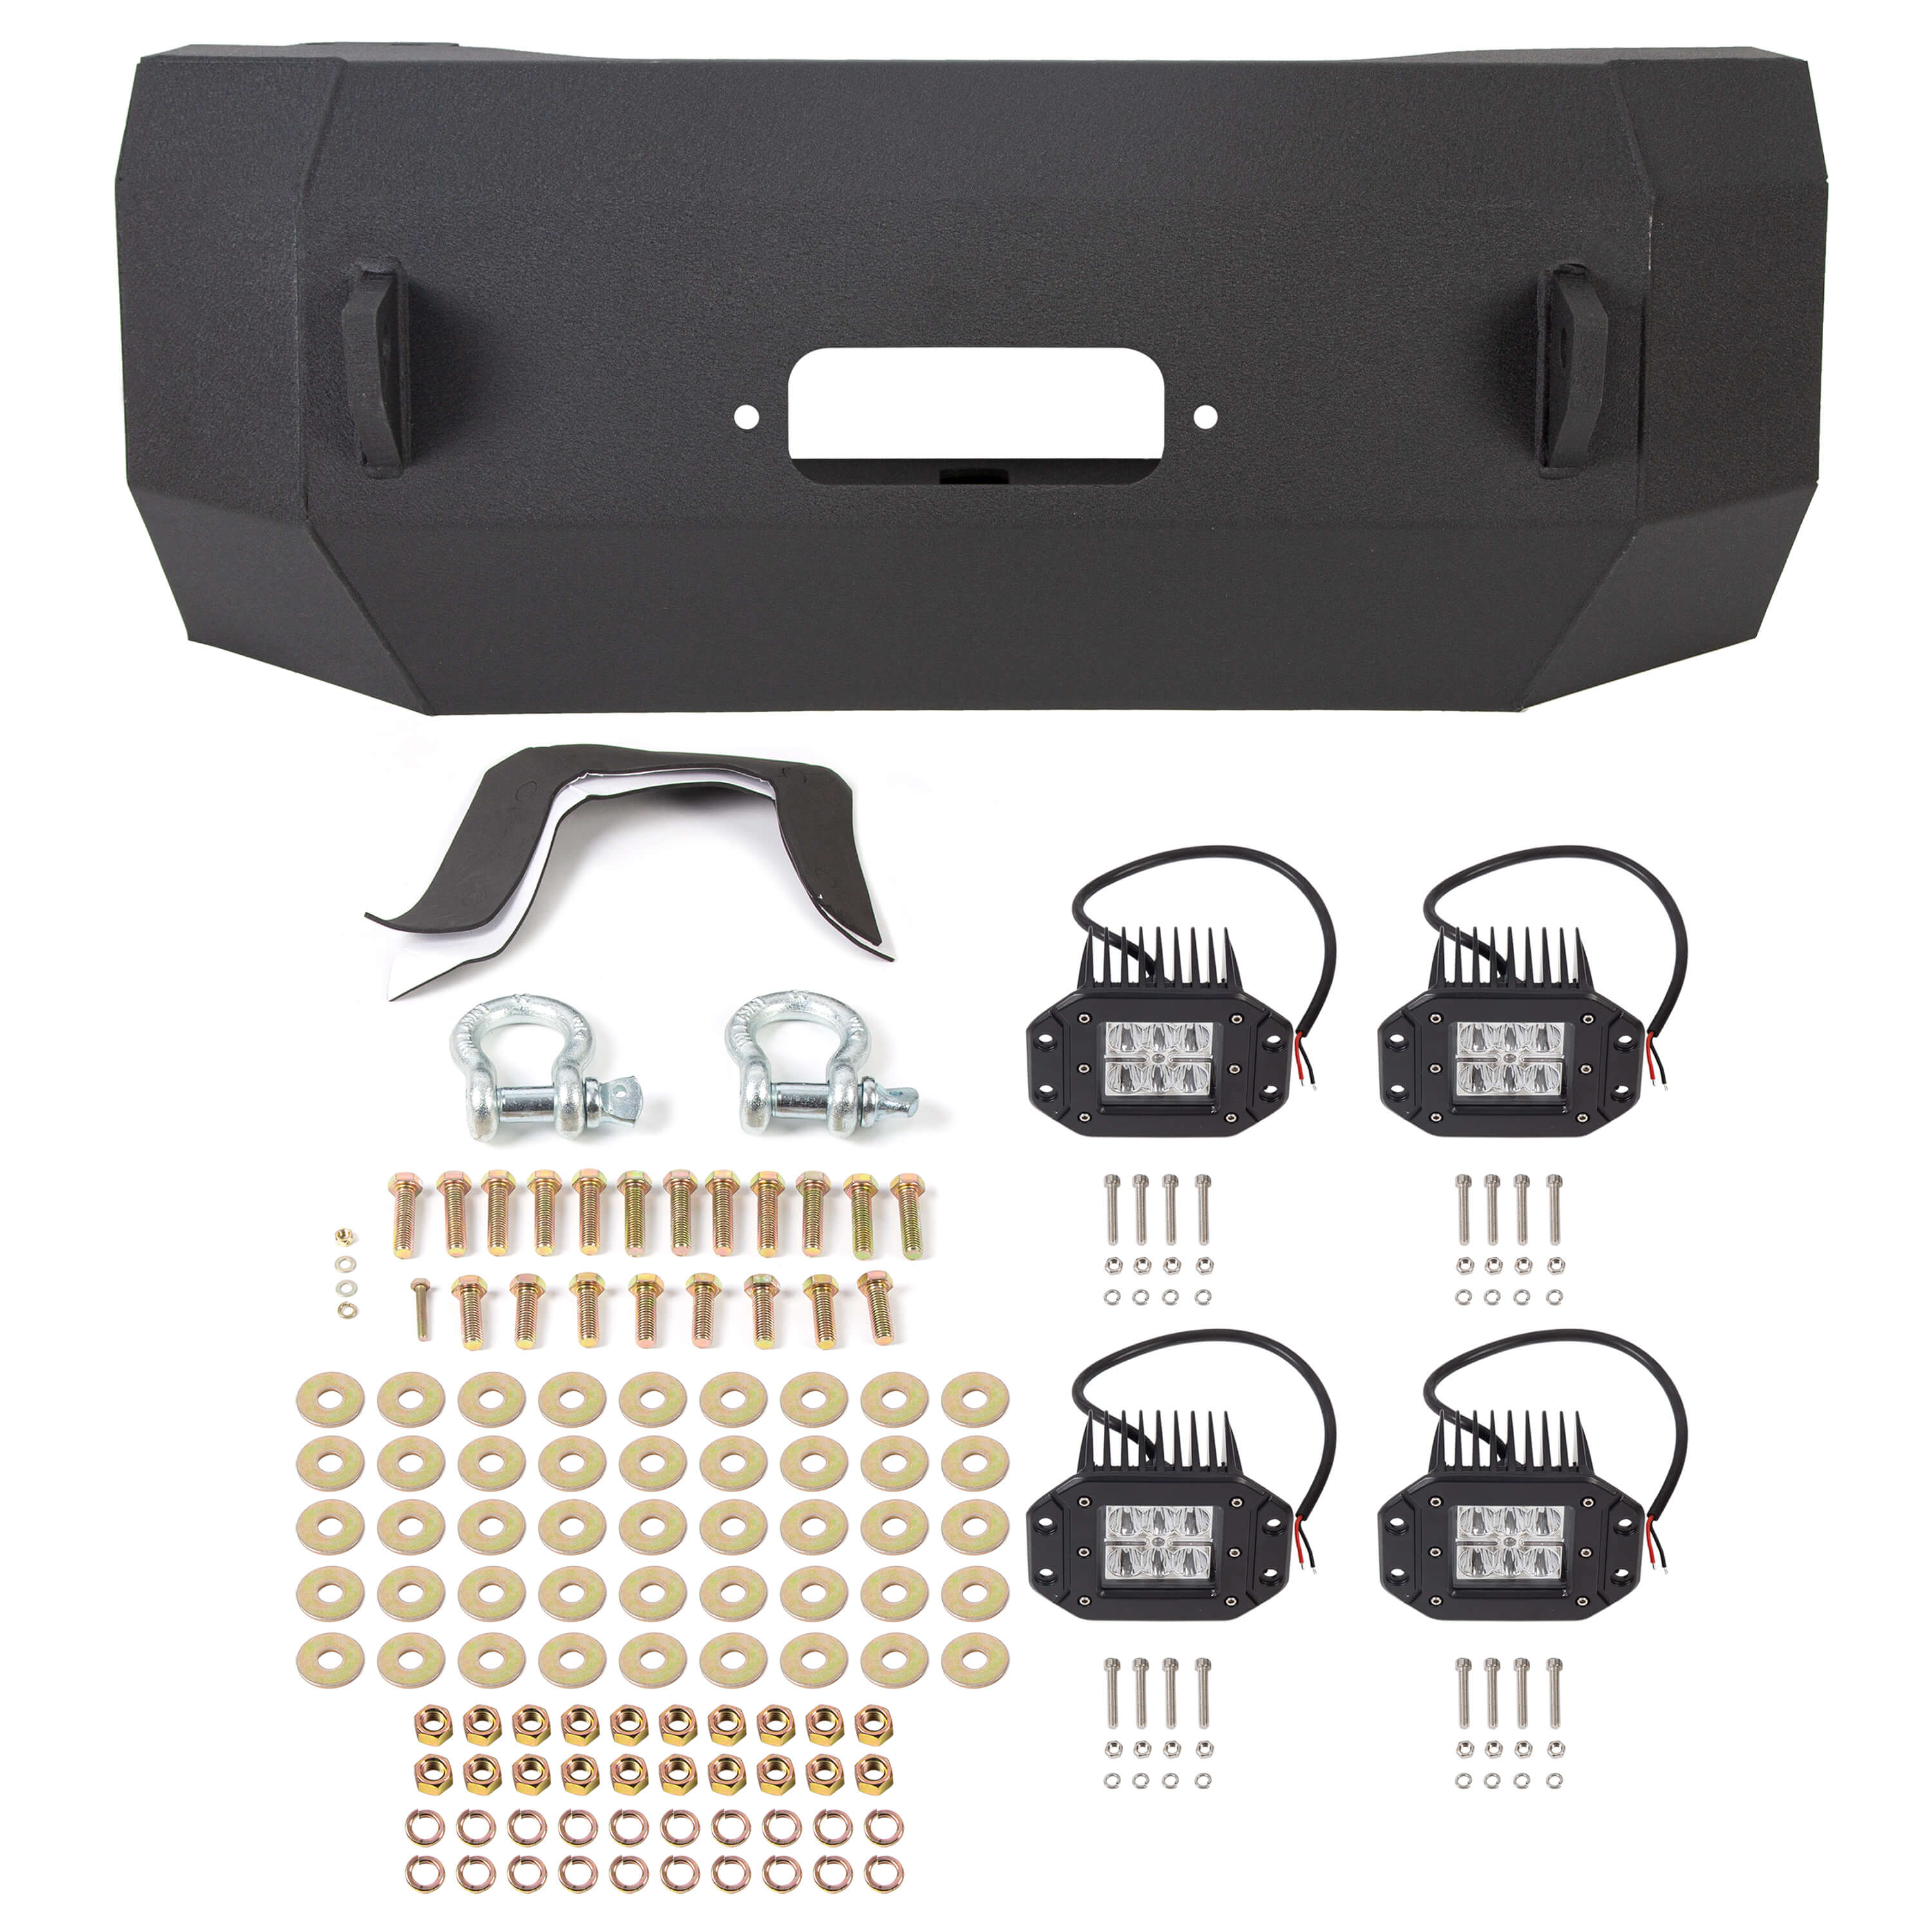 MR.GOP-Offroad Front Bumper for 2004-2008 Ford F-150,3 Piece Winch Ready